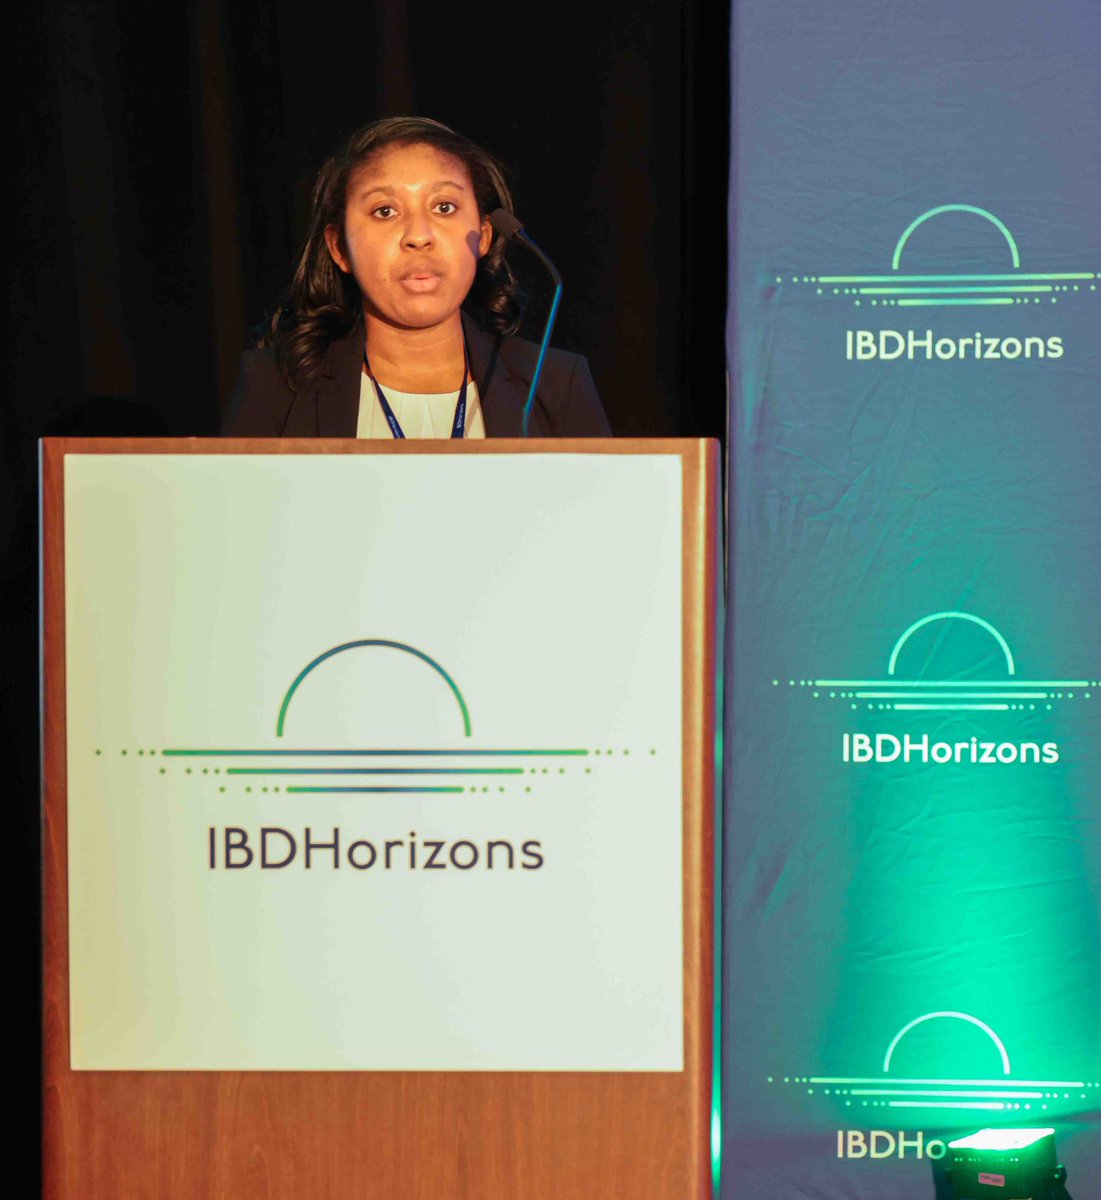 🎉 Kudos to @ariel_jordan22, one of #IBDHorizons23 abstract presenters, stepping into a new Board of Directors role! Your influential contributions to the #IBD community are shaping the future of care. 🪧For #IBDHorizons24 abstract submission info: IBDHorizons.org